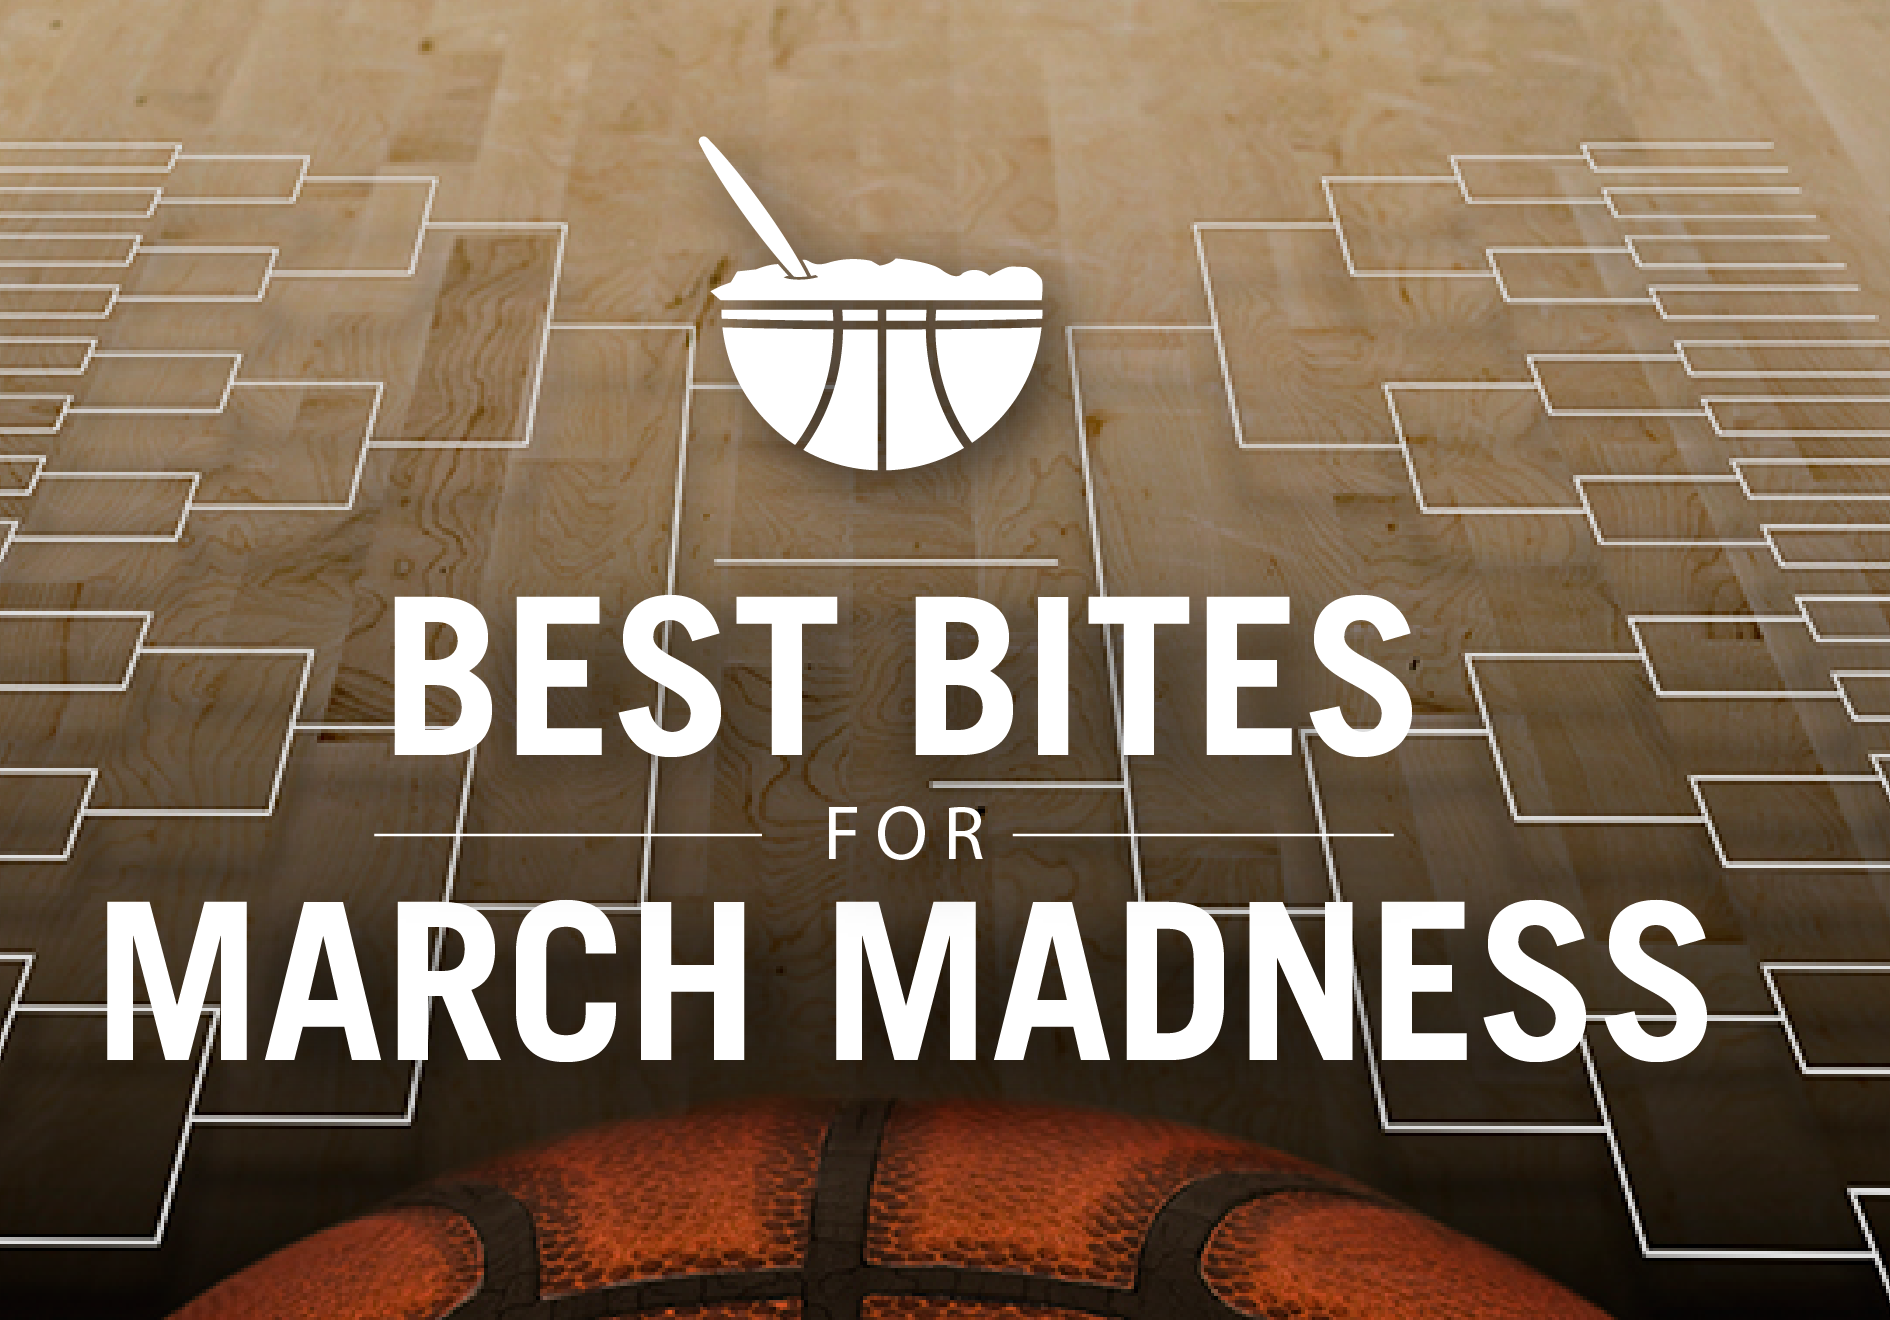 Recipes for March Madness